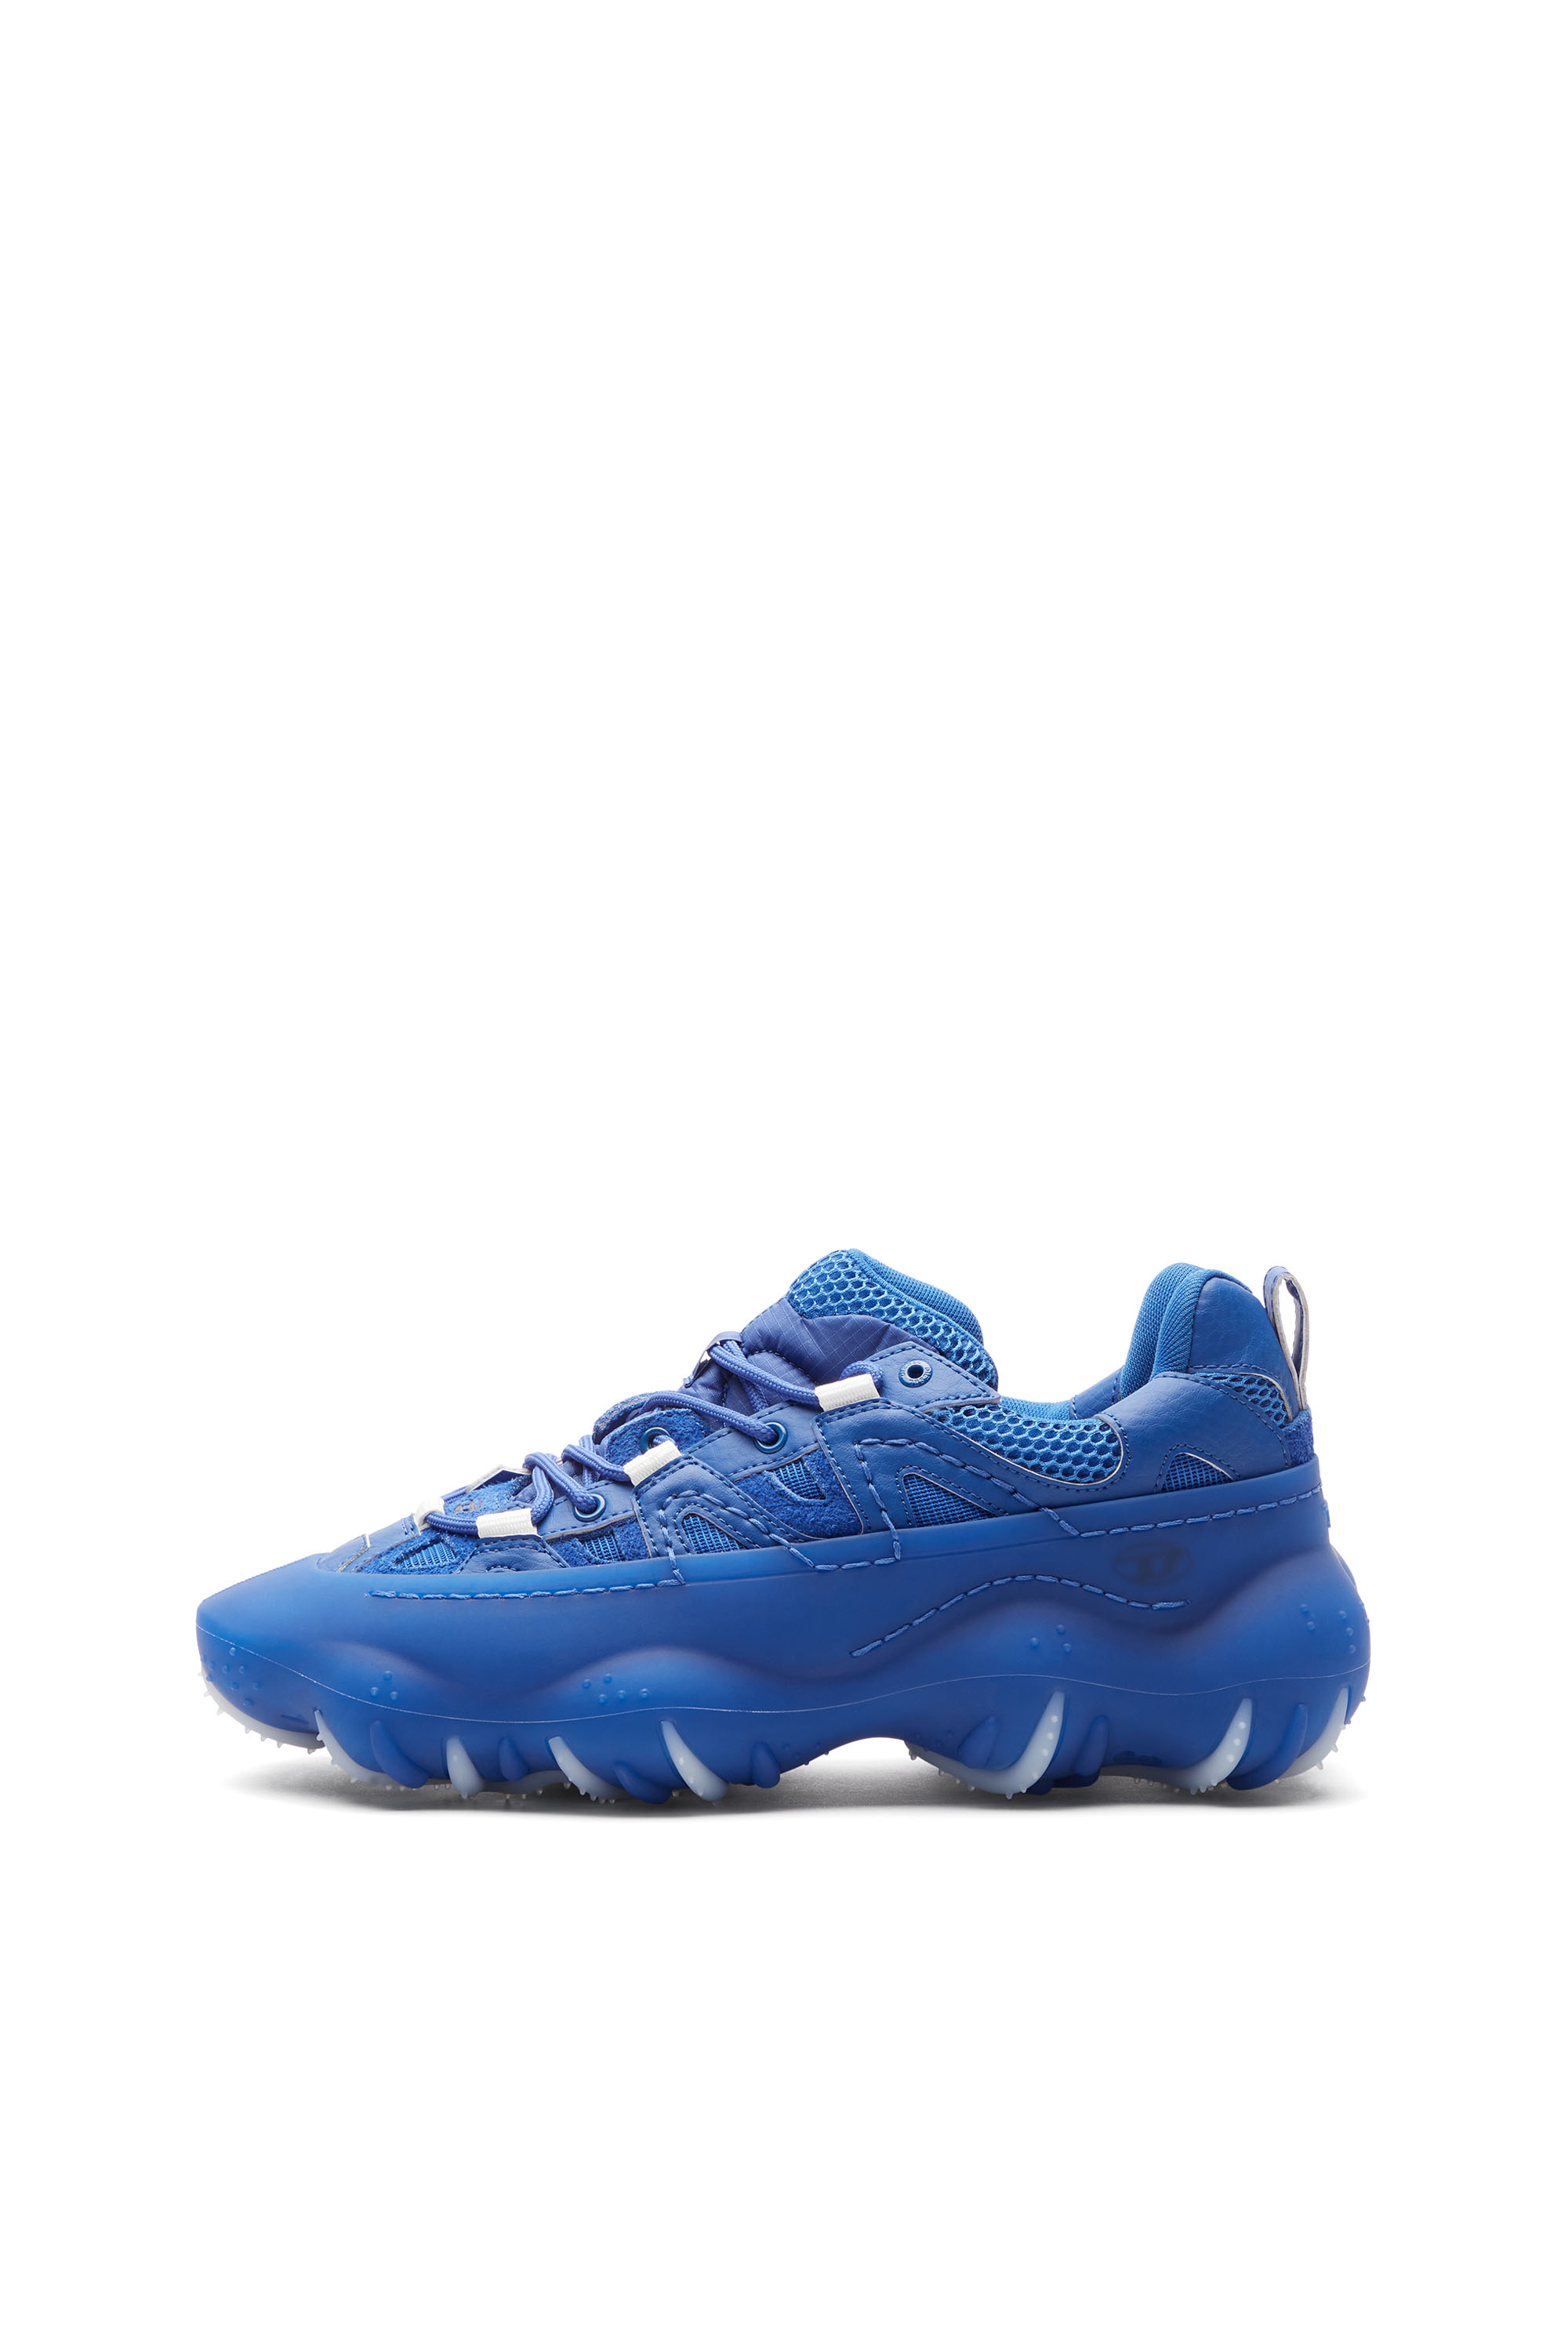 Diesel - S-PROTOTYPE P1, Man S-Prototype P1-Low-top sneakers with rubber overlay in Blue - Image 7